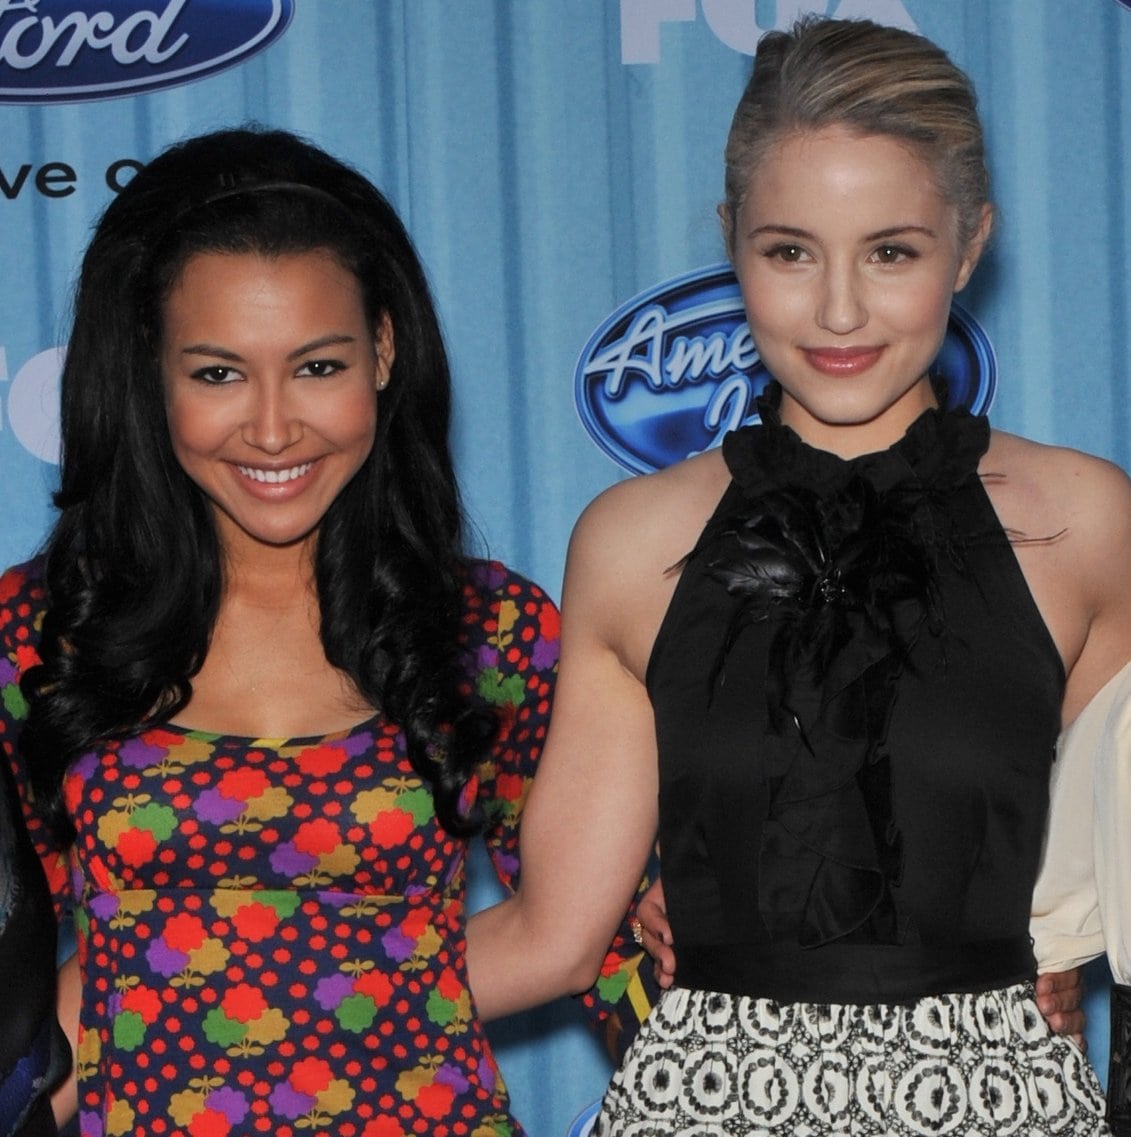 Naya Rivera with her Glee co-star Dianna Agron, whose father was diagnosed with multiple sclerosis when Agron was just 15 years old